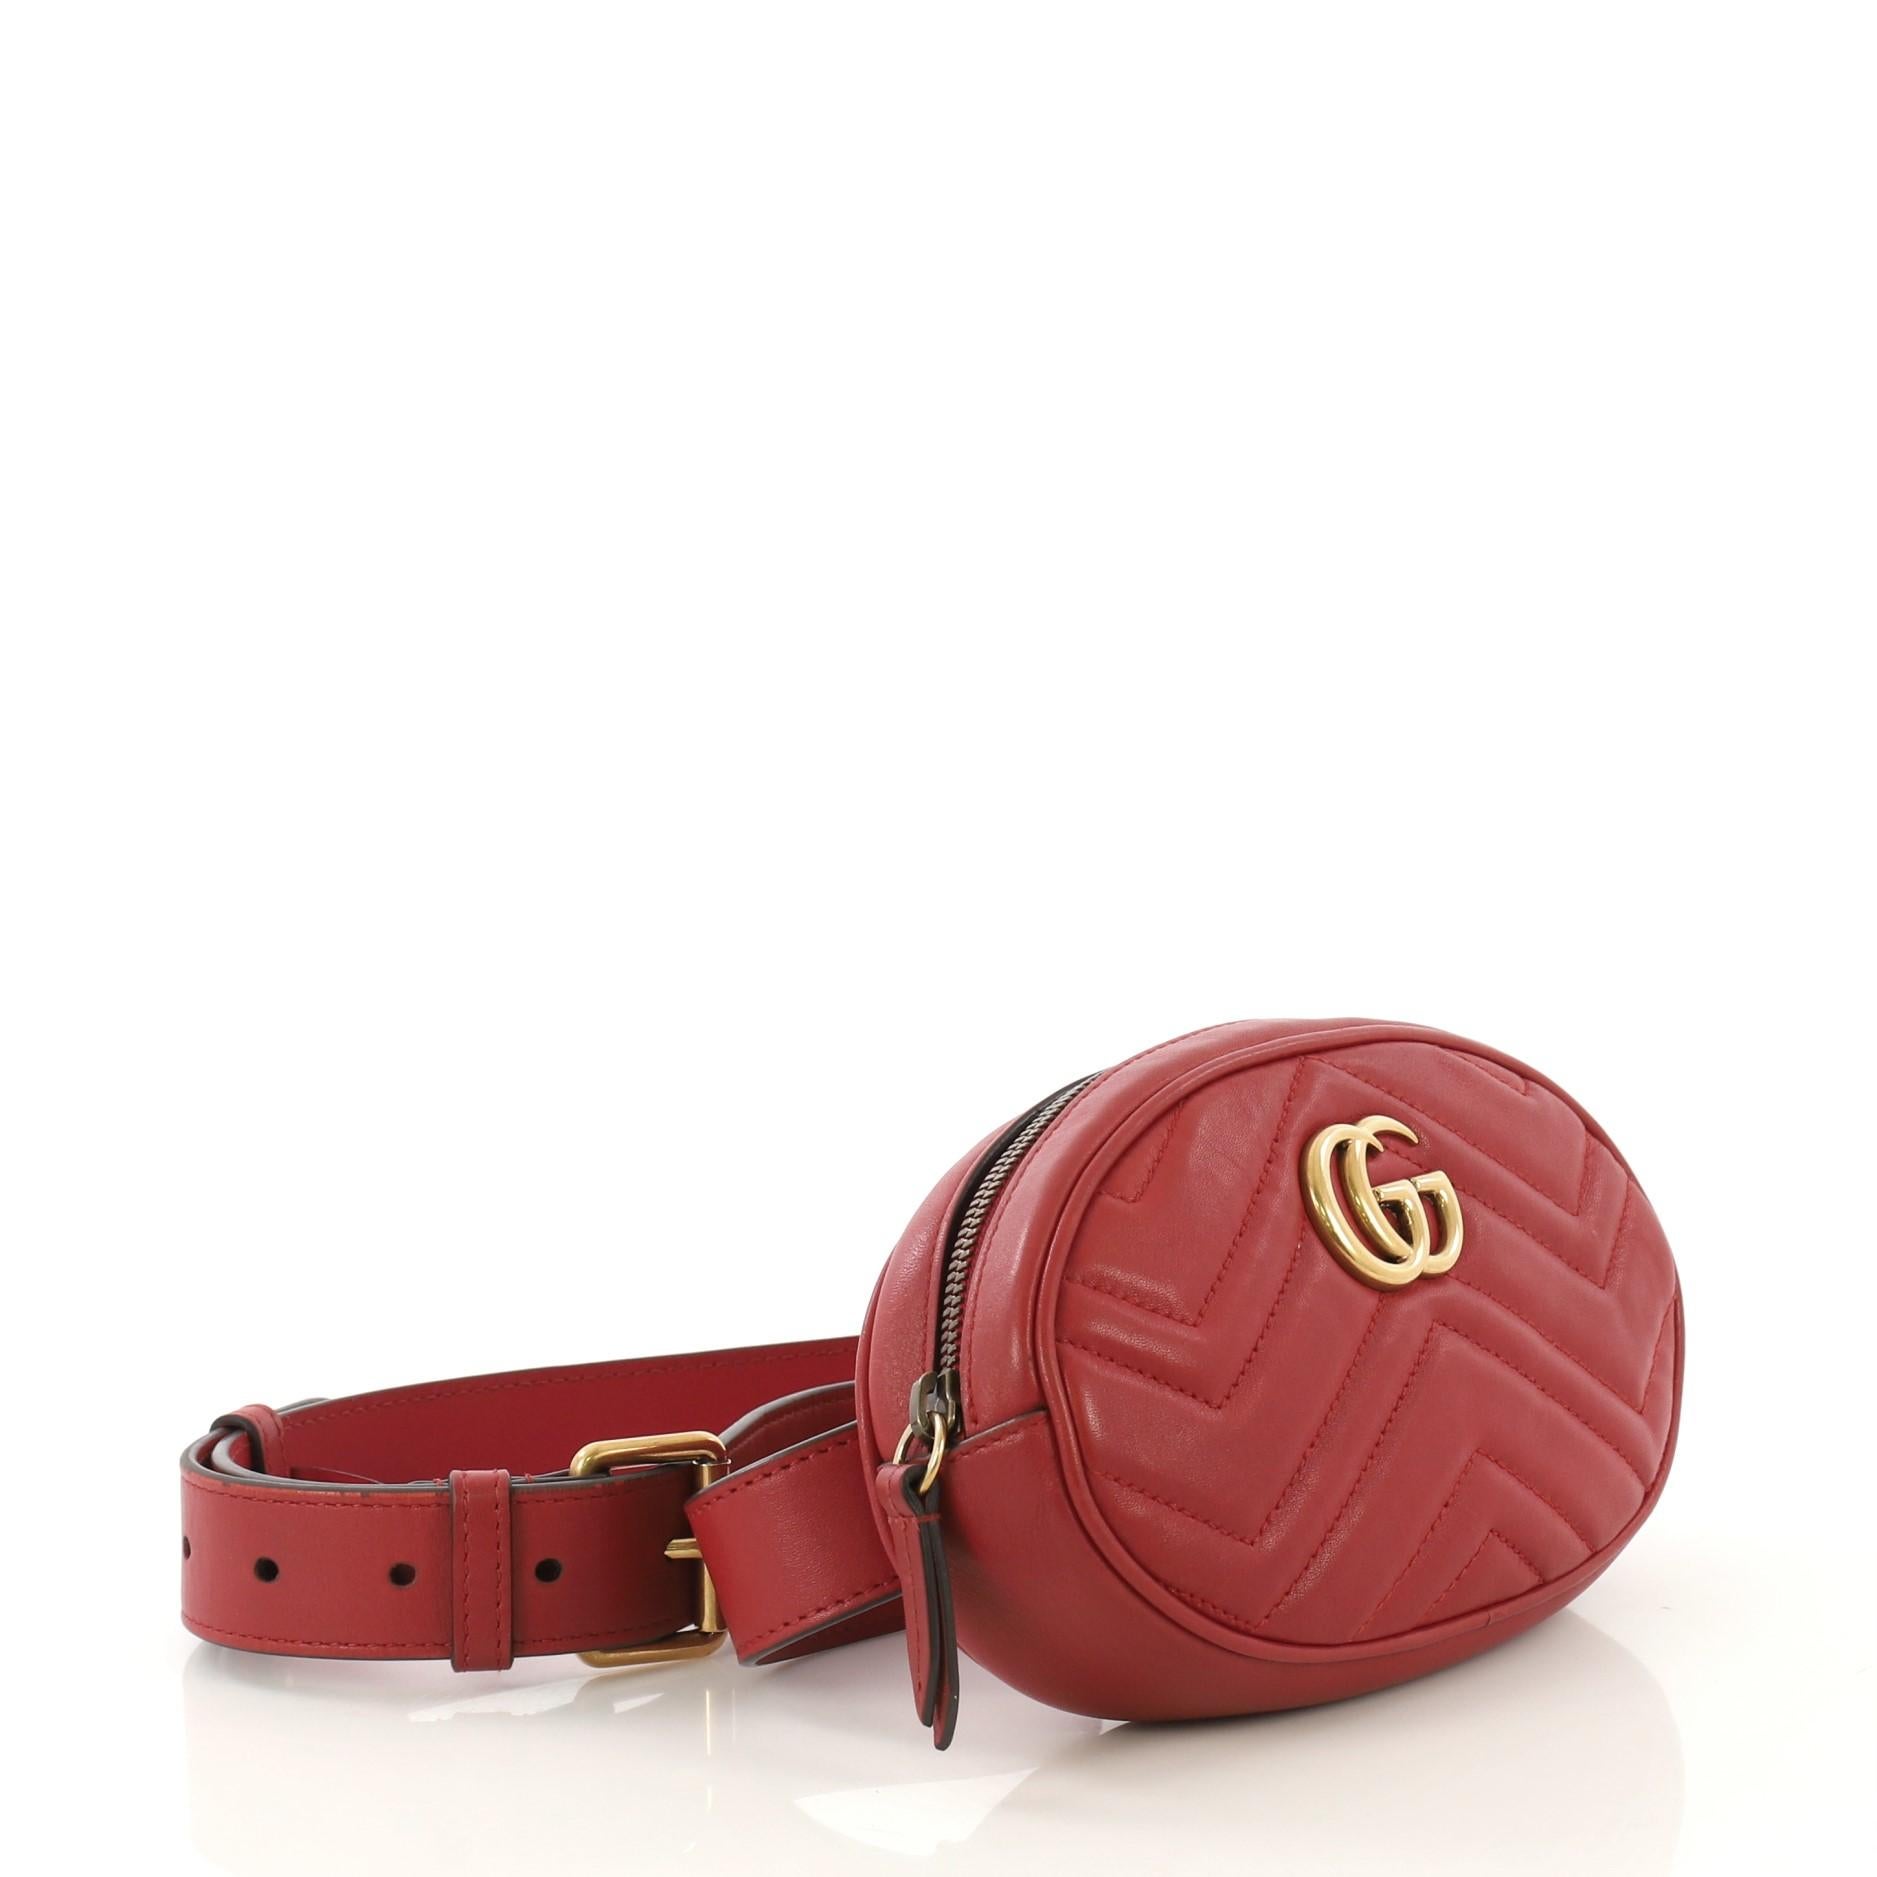 Red Gucci GG Marmont Belt Bag Matelasse Leather